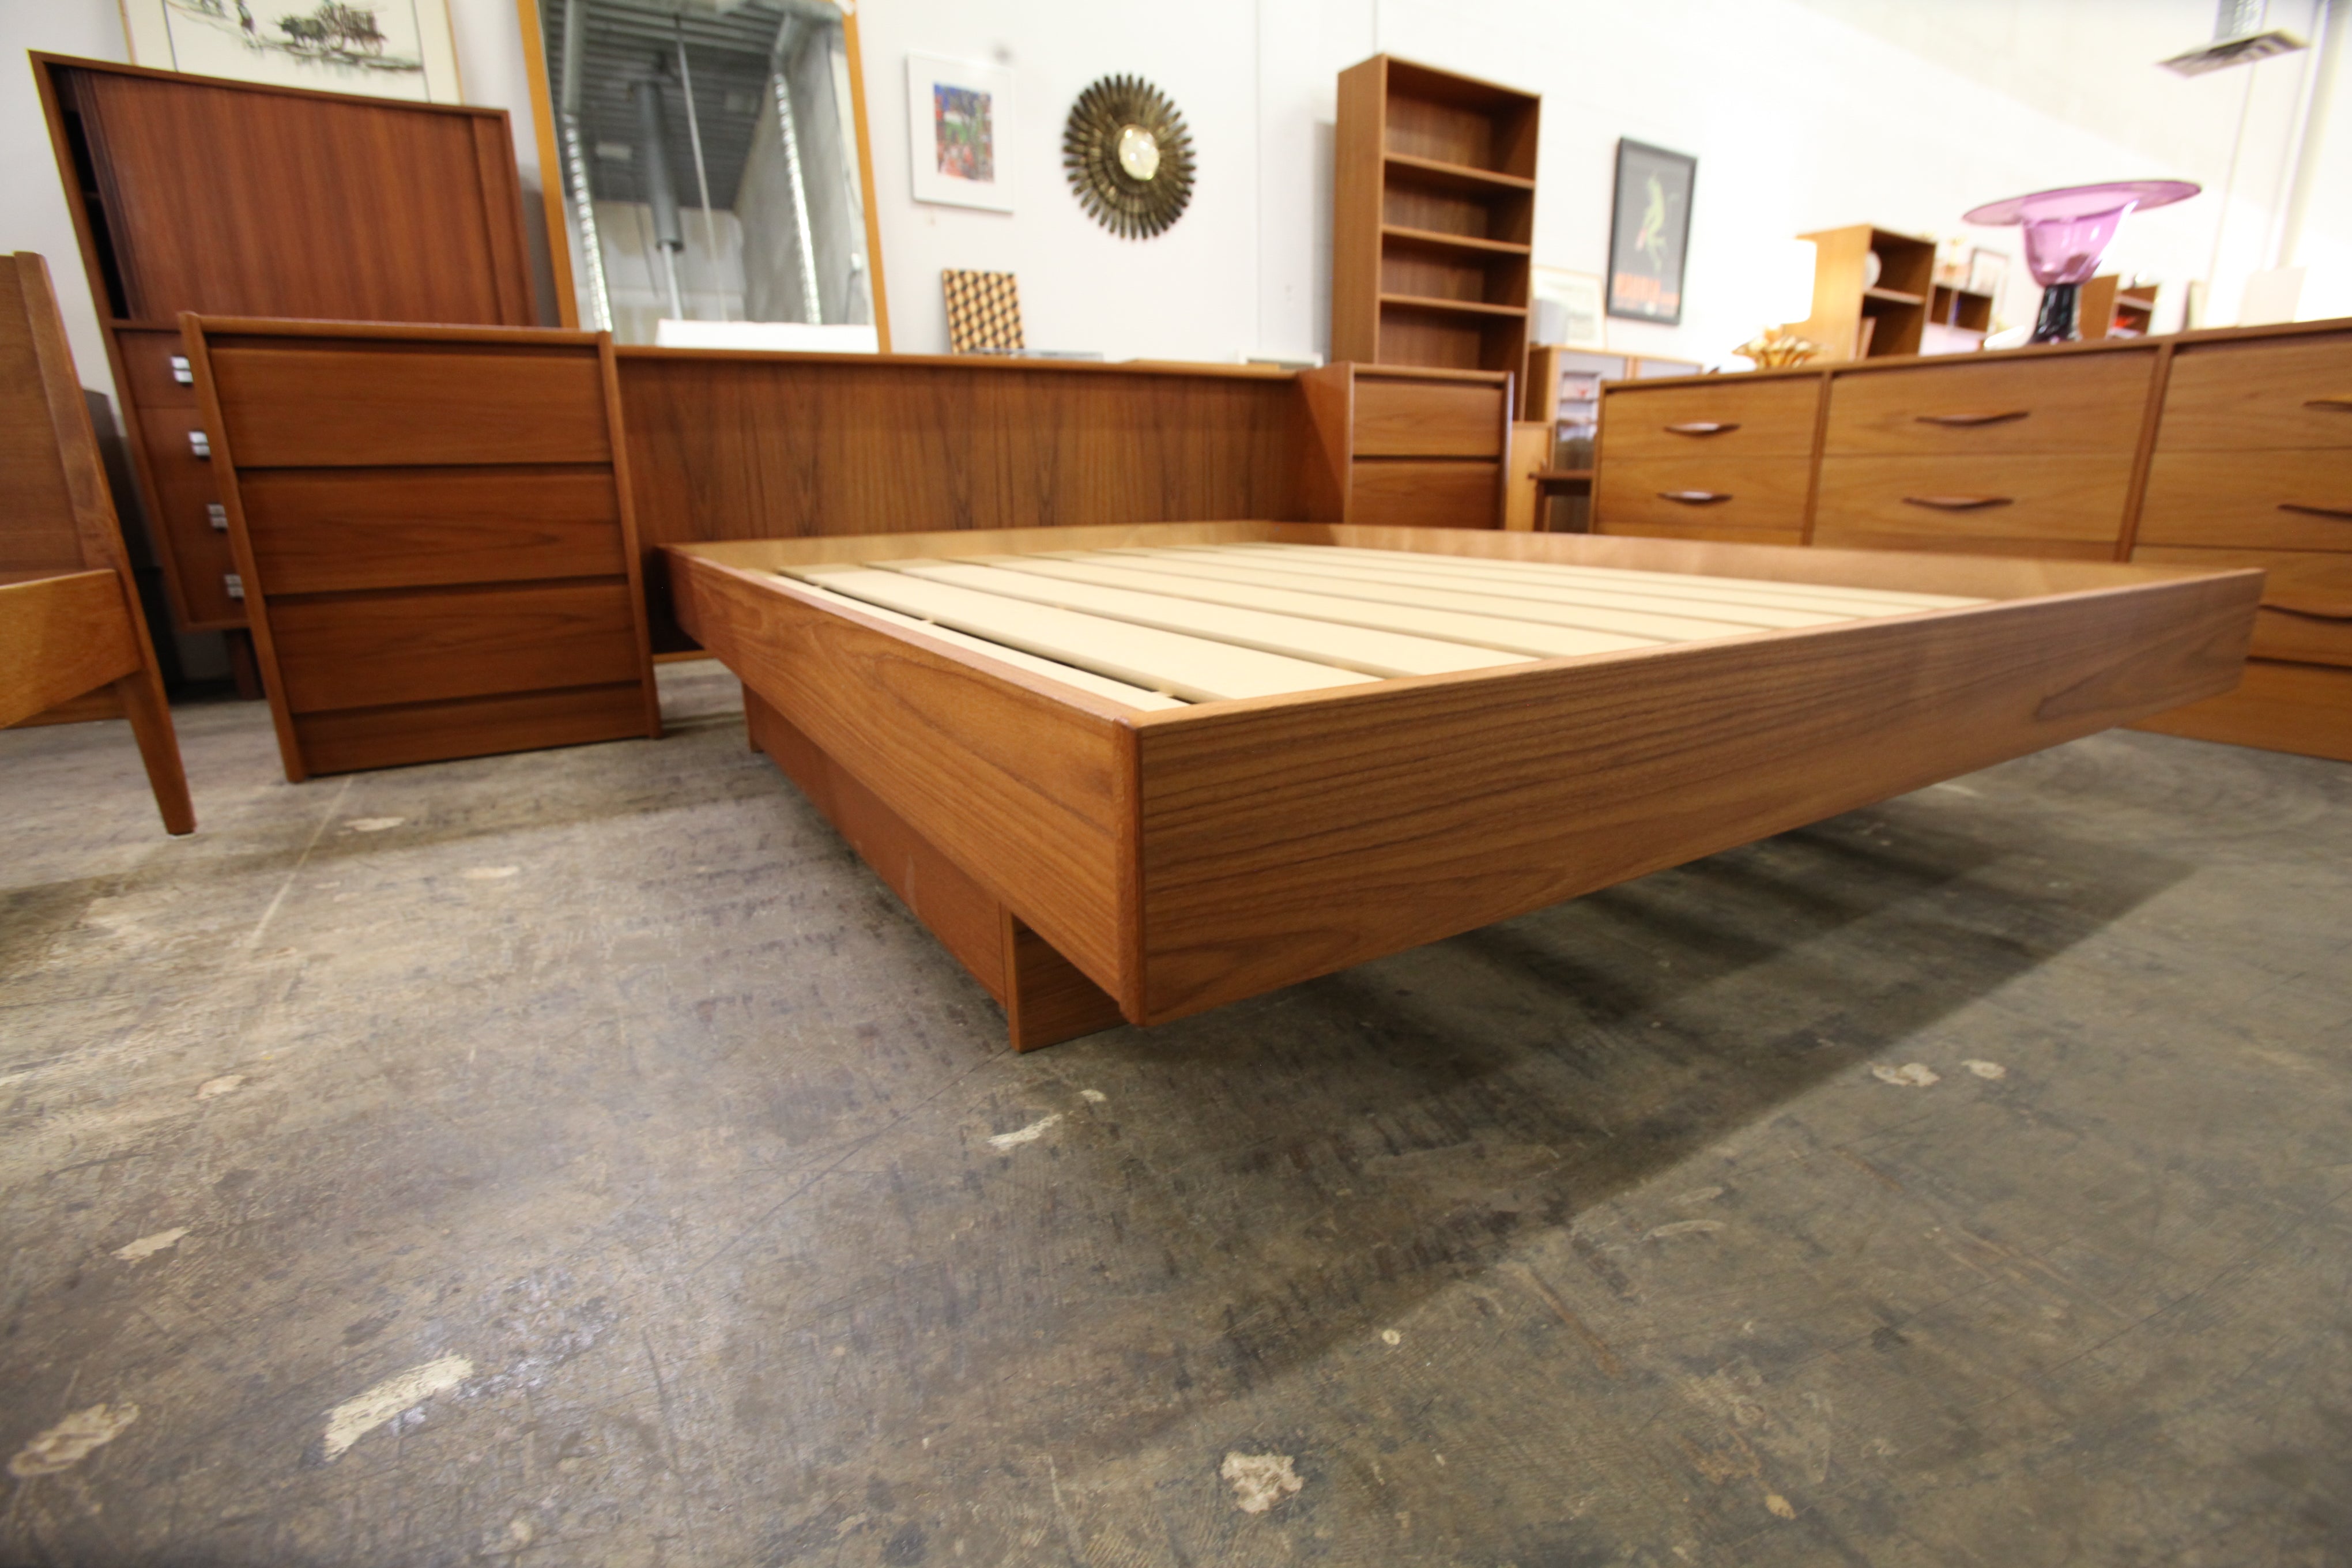 Vintage Teak Queen Size Bed with Night Stands (114"W x 30"H x 90"D)